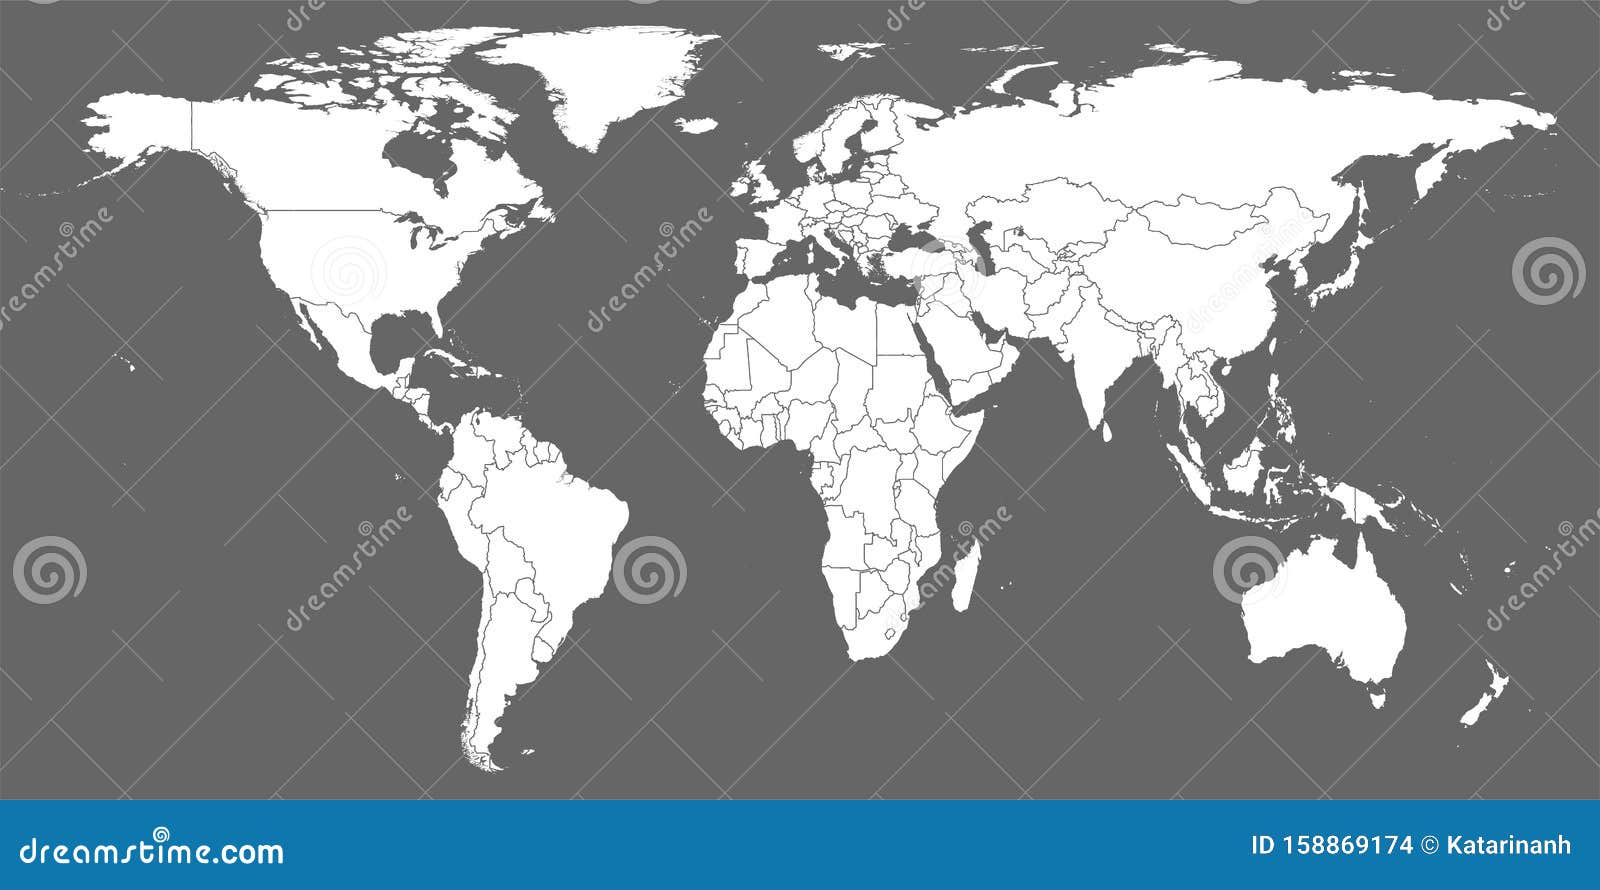 world map . gray similar world map blank  on gray background.  white similar world map with borders of all countries.